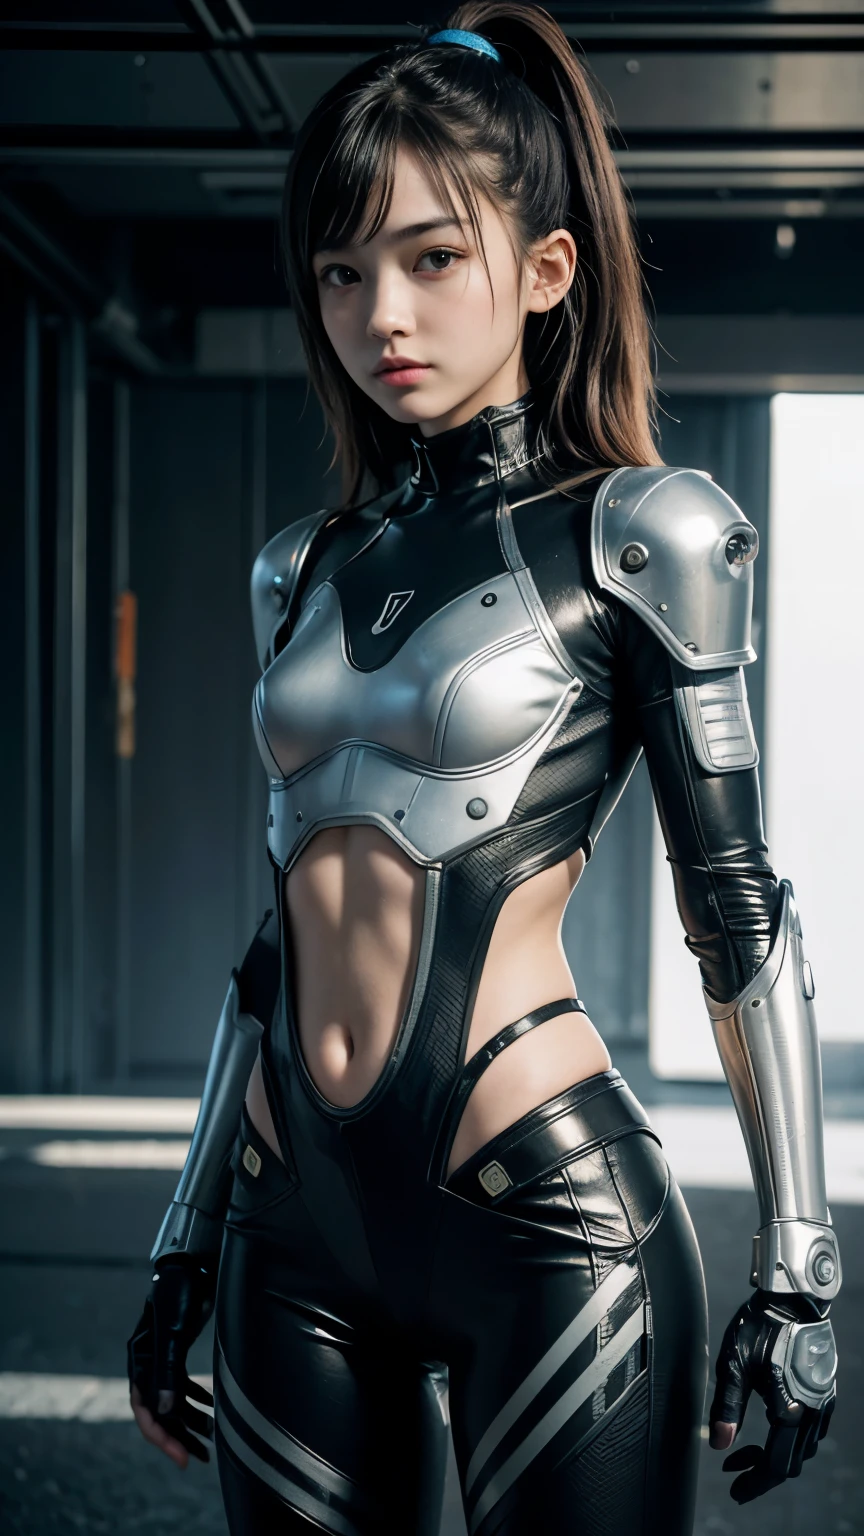 high quality, ​realistic masterpiece, two close friends, Beautiful tween girls, small skinny girls, cute girl face, cyberpunk, Wearing futuristic robotic tactical shear armor cyberpunk suit with cutouts showing body, skinny athletic body showing legs, innocent, playful, Famous actresses of Japan, very beautiful face